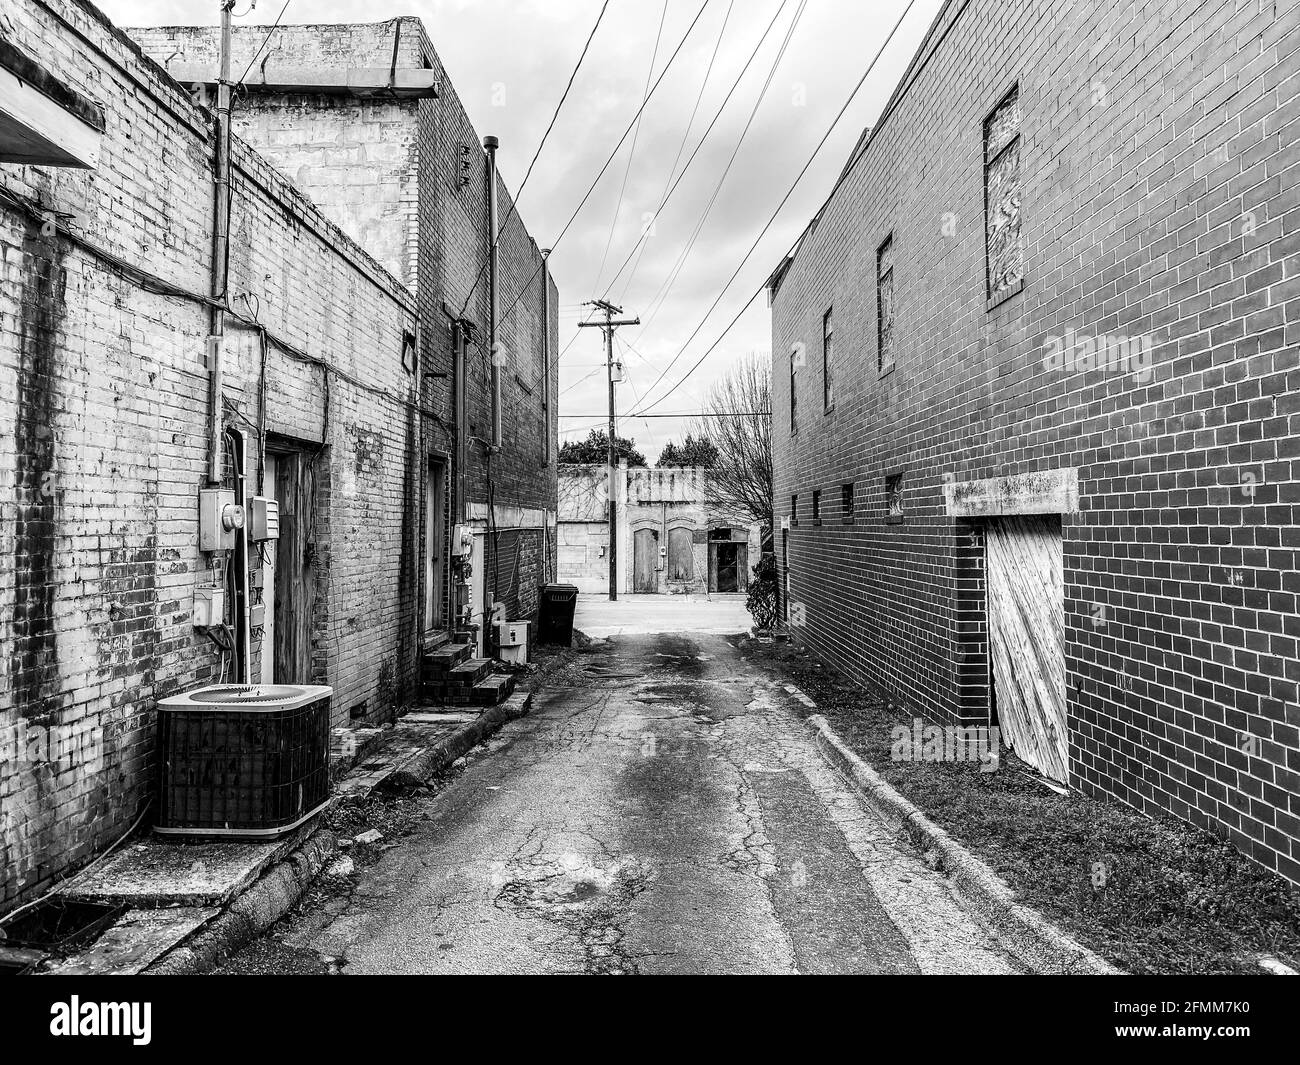 deserted abandoned rural town back alley in dark lonely moody despair black and white as an architecture scene Stock Photo